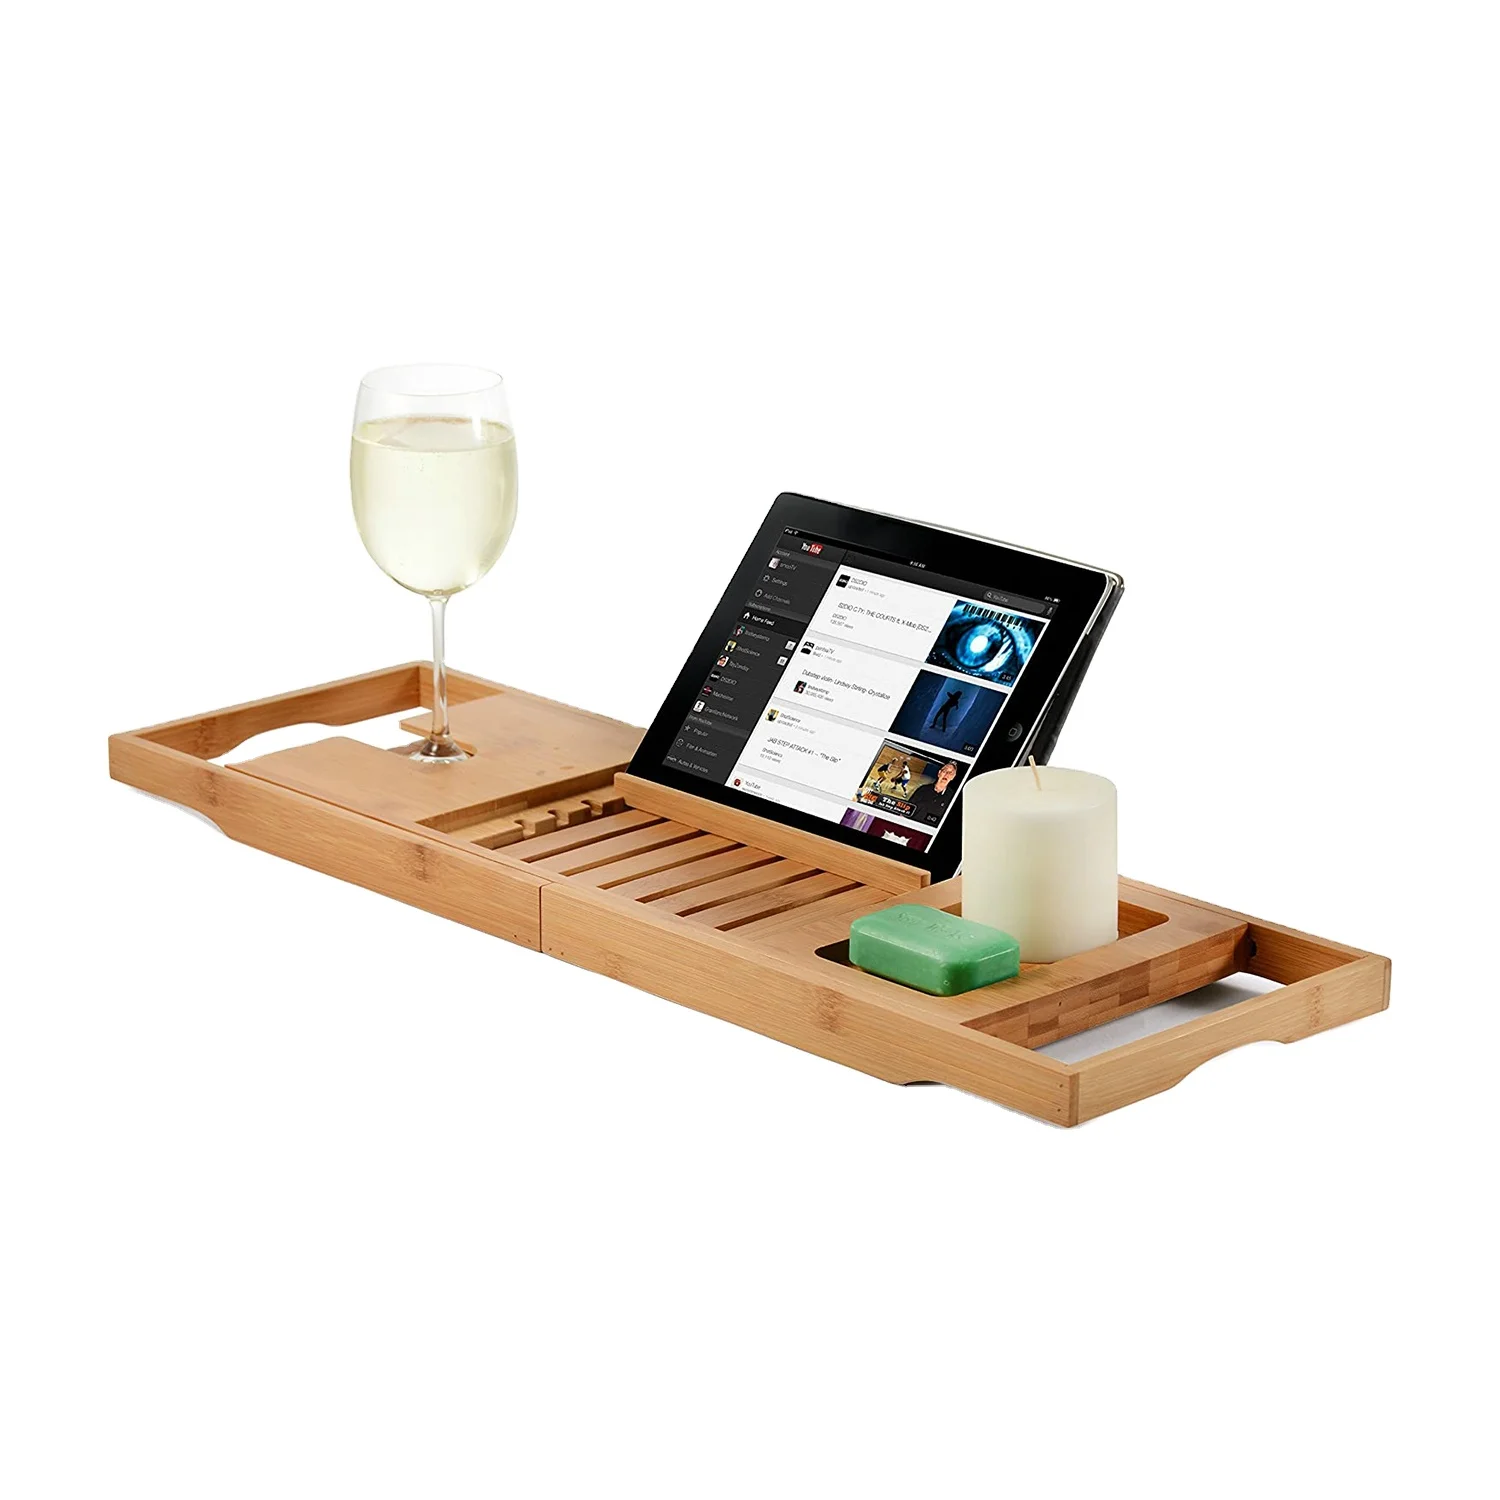 

Amazon Best Sellers Luxury Bamboo Bathtub Tray Caddy Wood Bath Tray With Expandable Sides Book Tablet Phone Wine glass Holder, Natural bamboo color